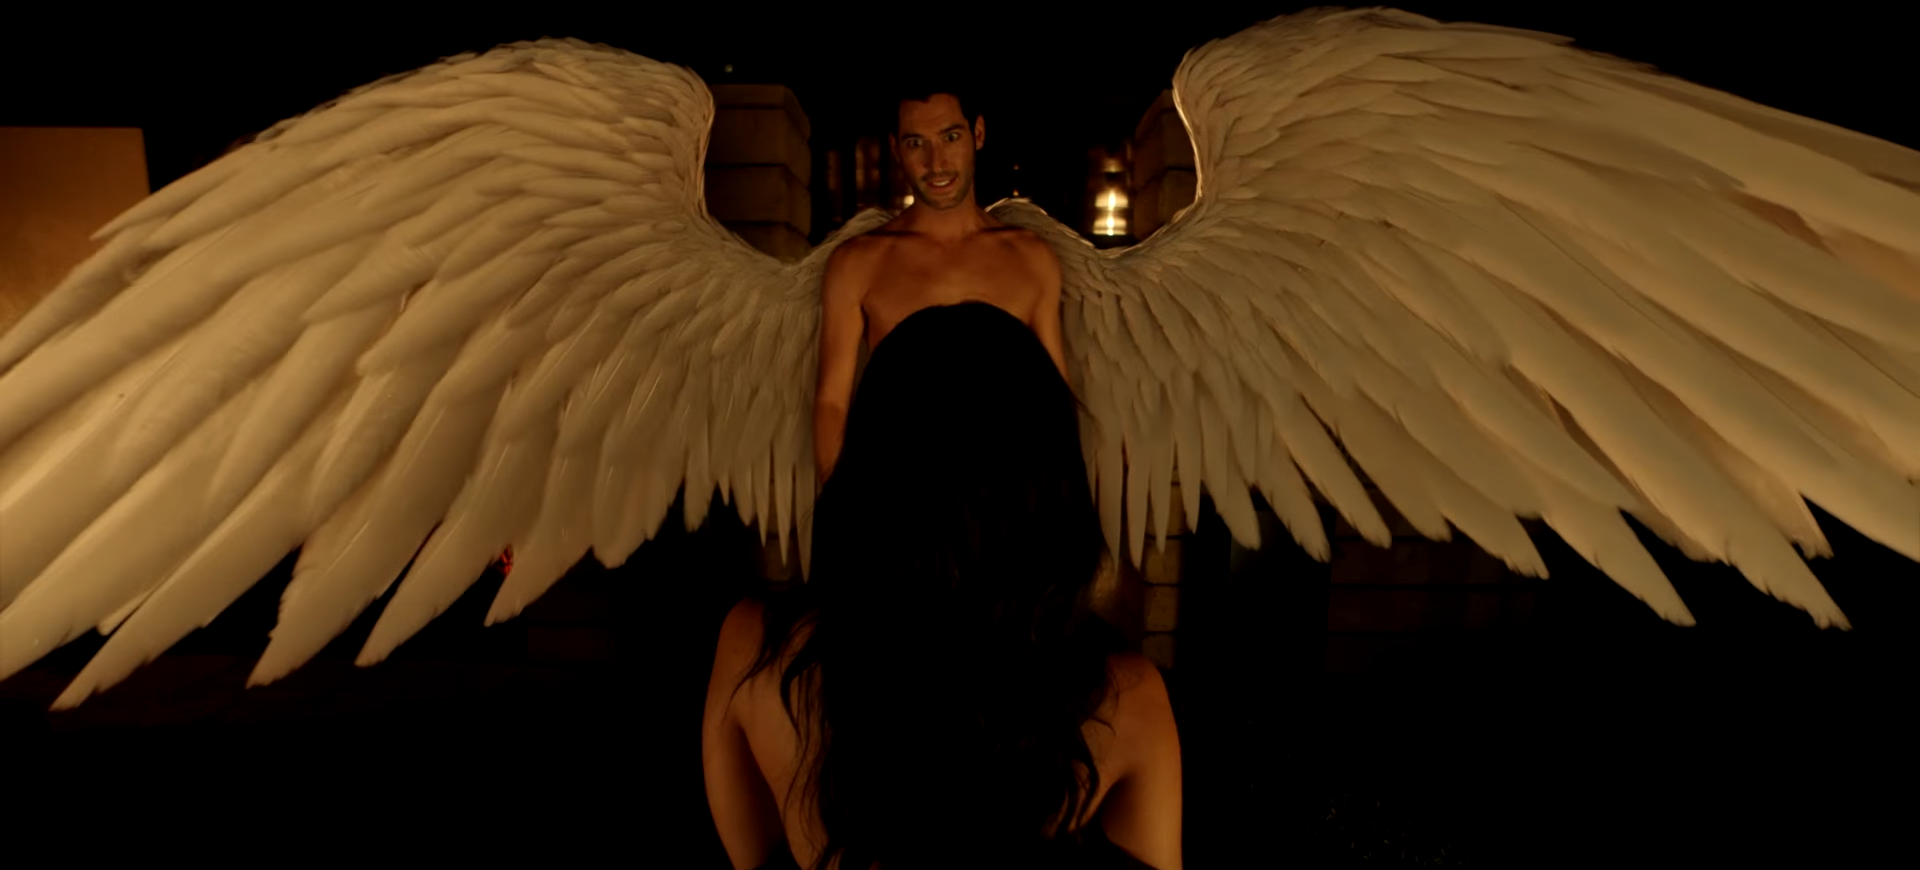 Category:Angel wing images | Lucifer Wiki | Fandom